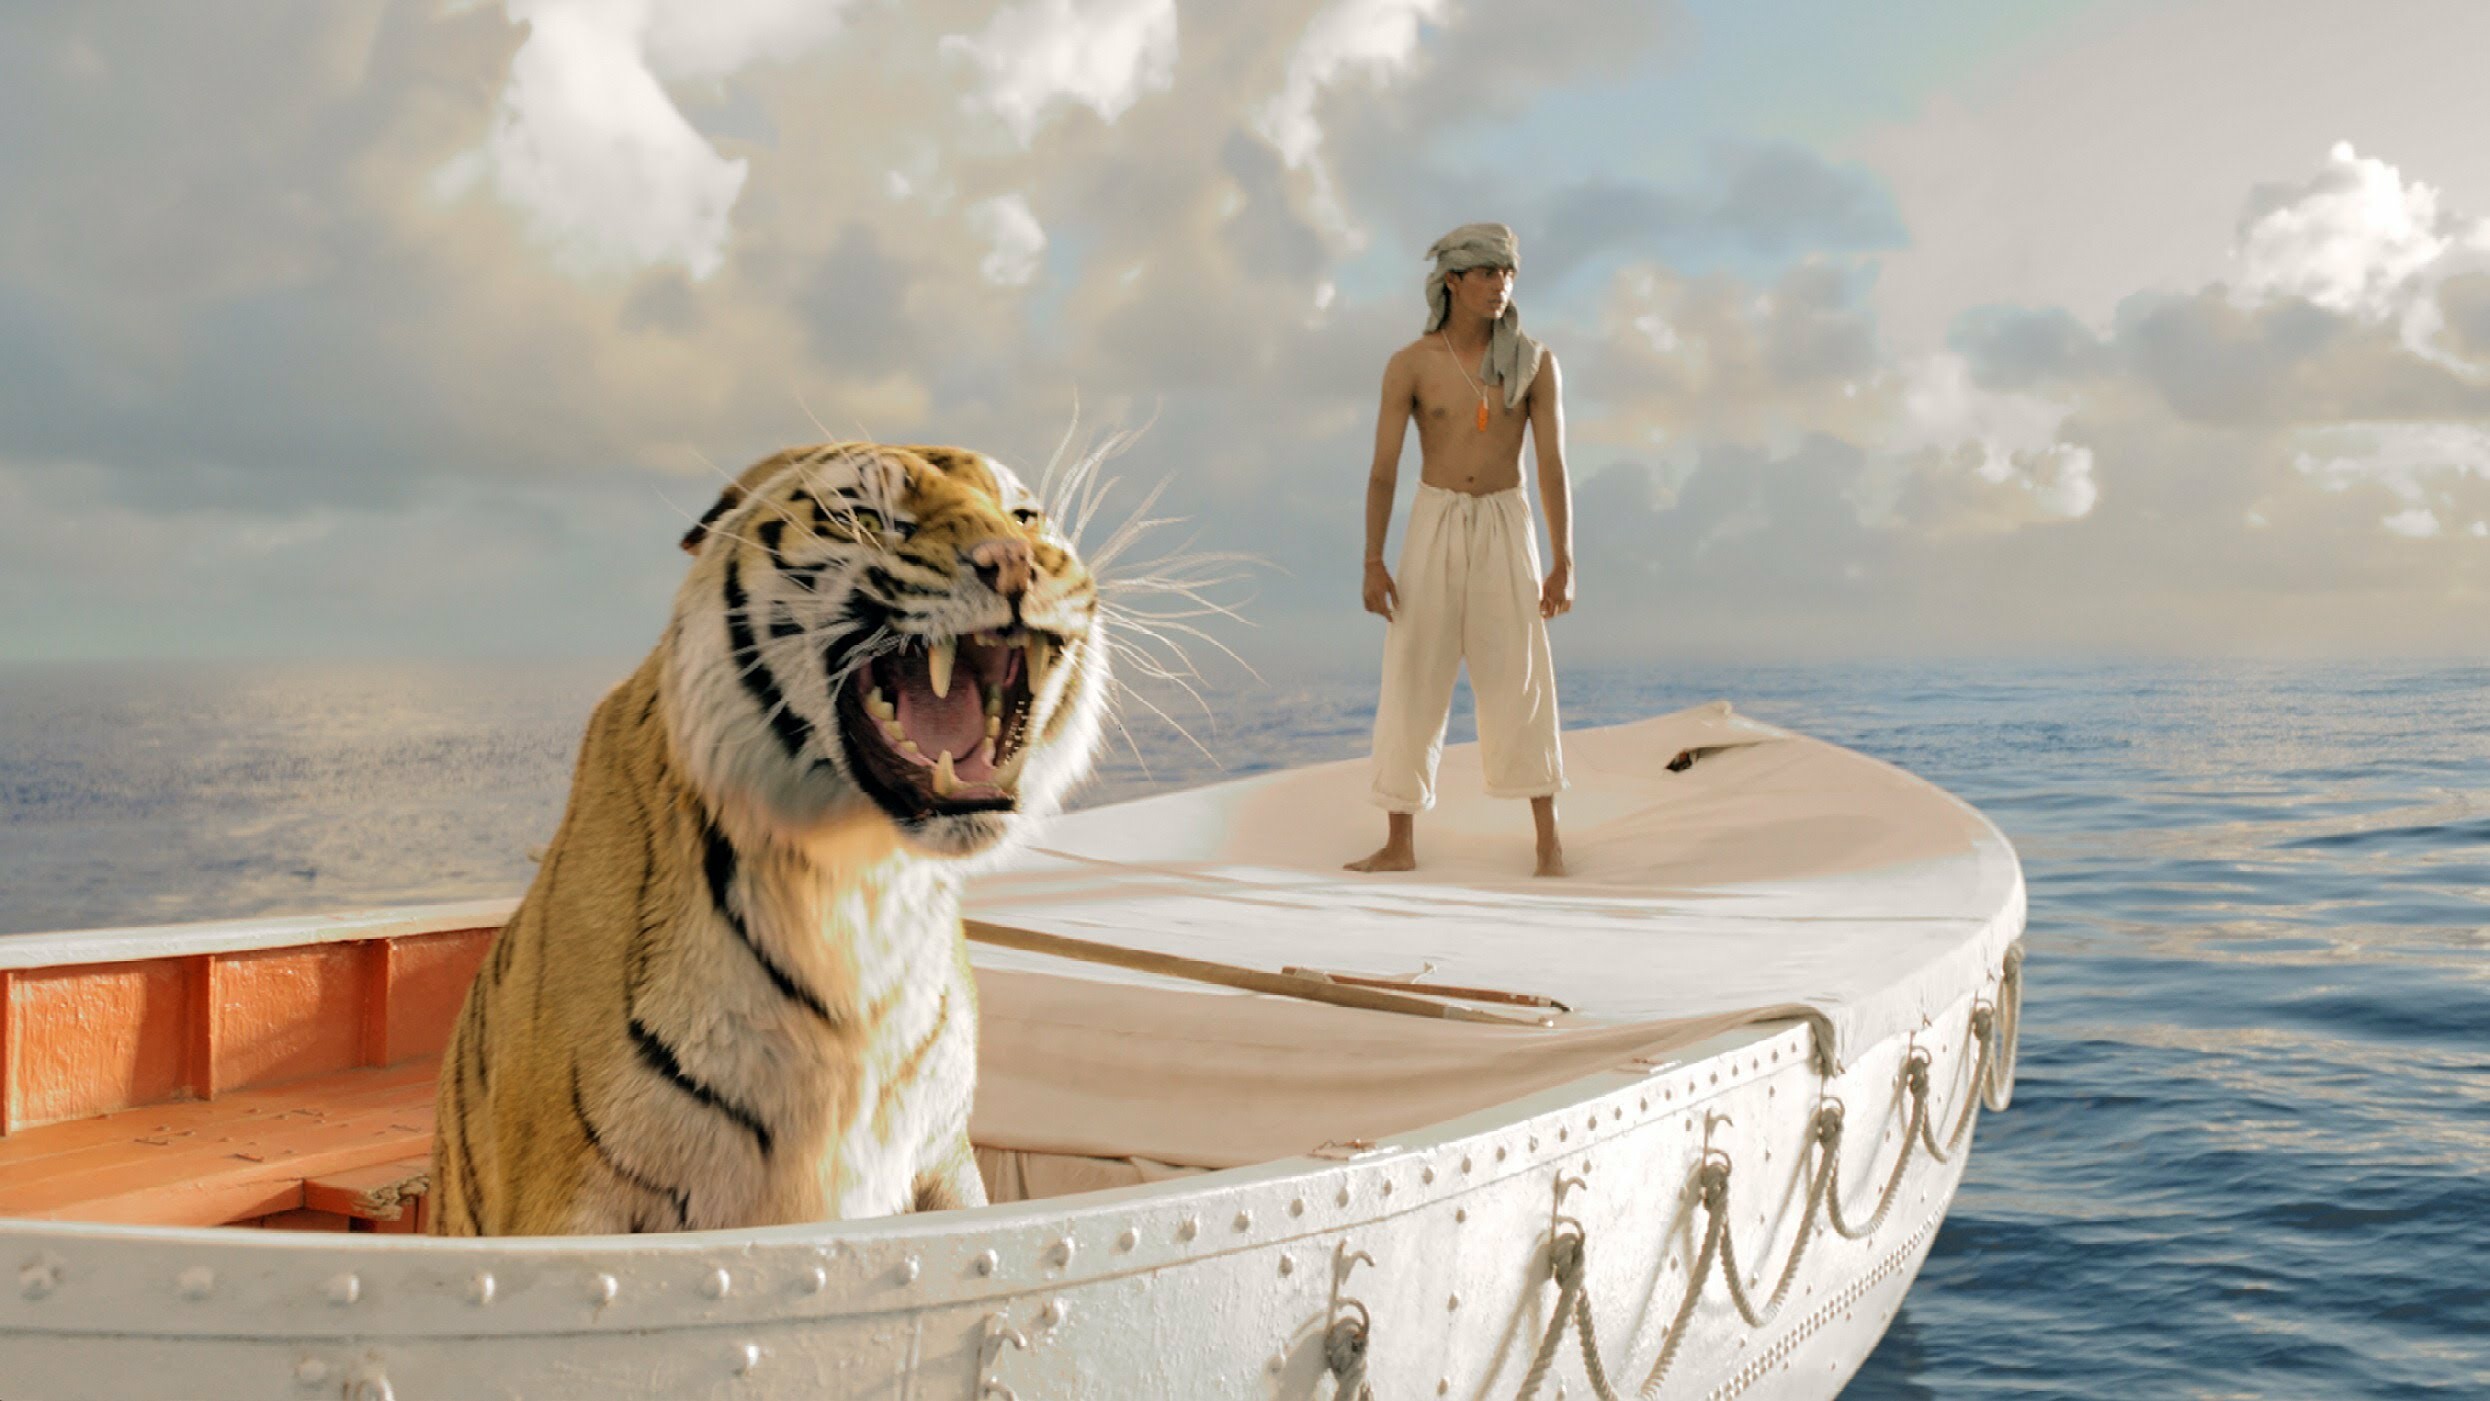 Life of Pi: The heart of the film focuses on the sea journey, during which the human demonstrates that he can think with great ingenuity and the tiger shows that it can learn. 2490x1410 HD Background.